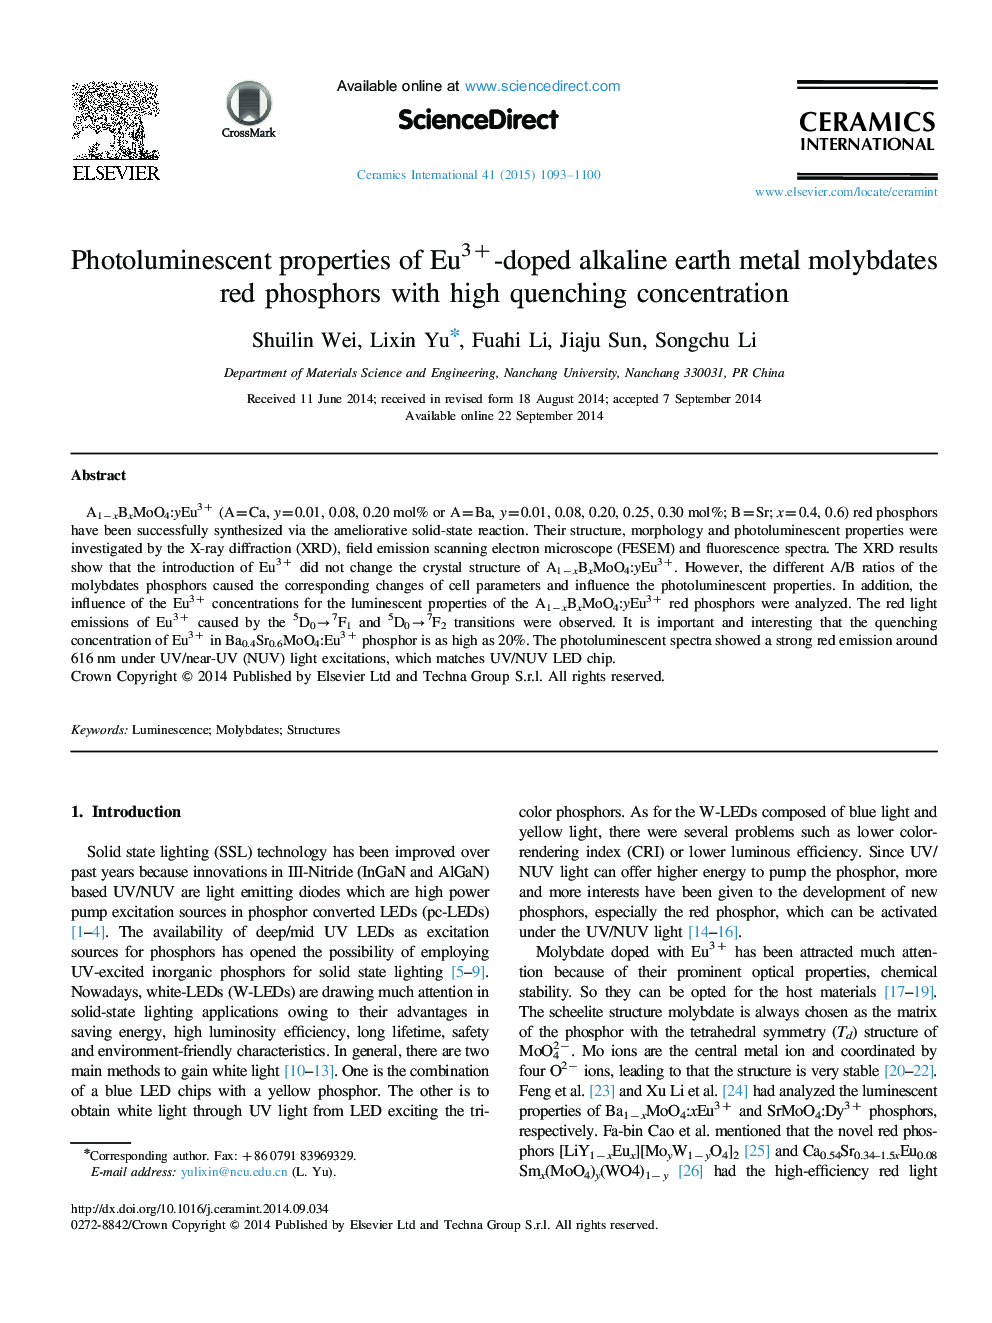 Photoluminescent properties of Eu3+-doped alkaline earth metal molybdates red phosphors with high quenching concentration